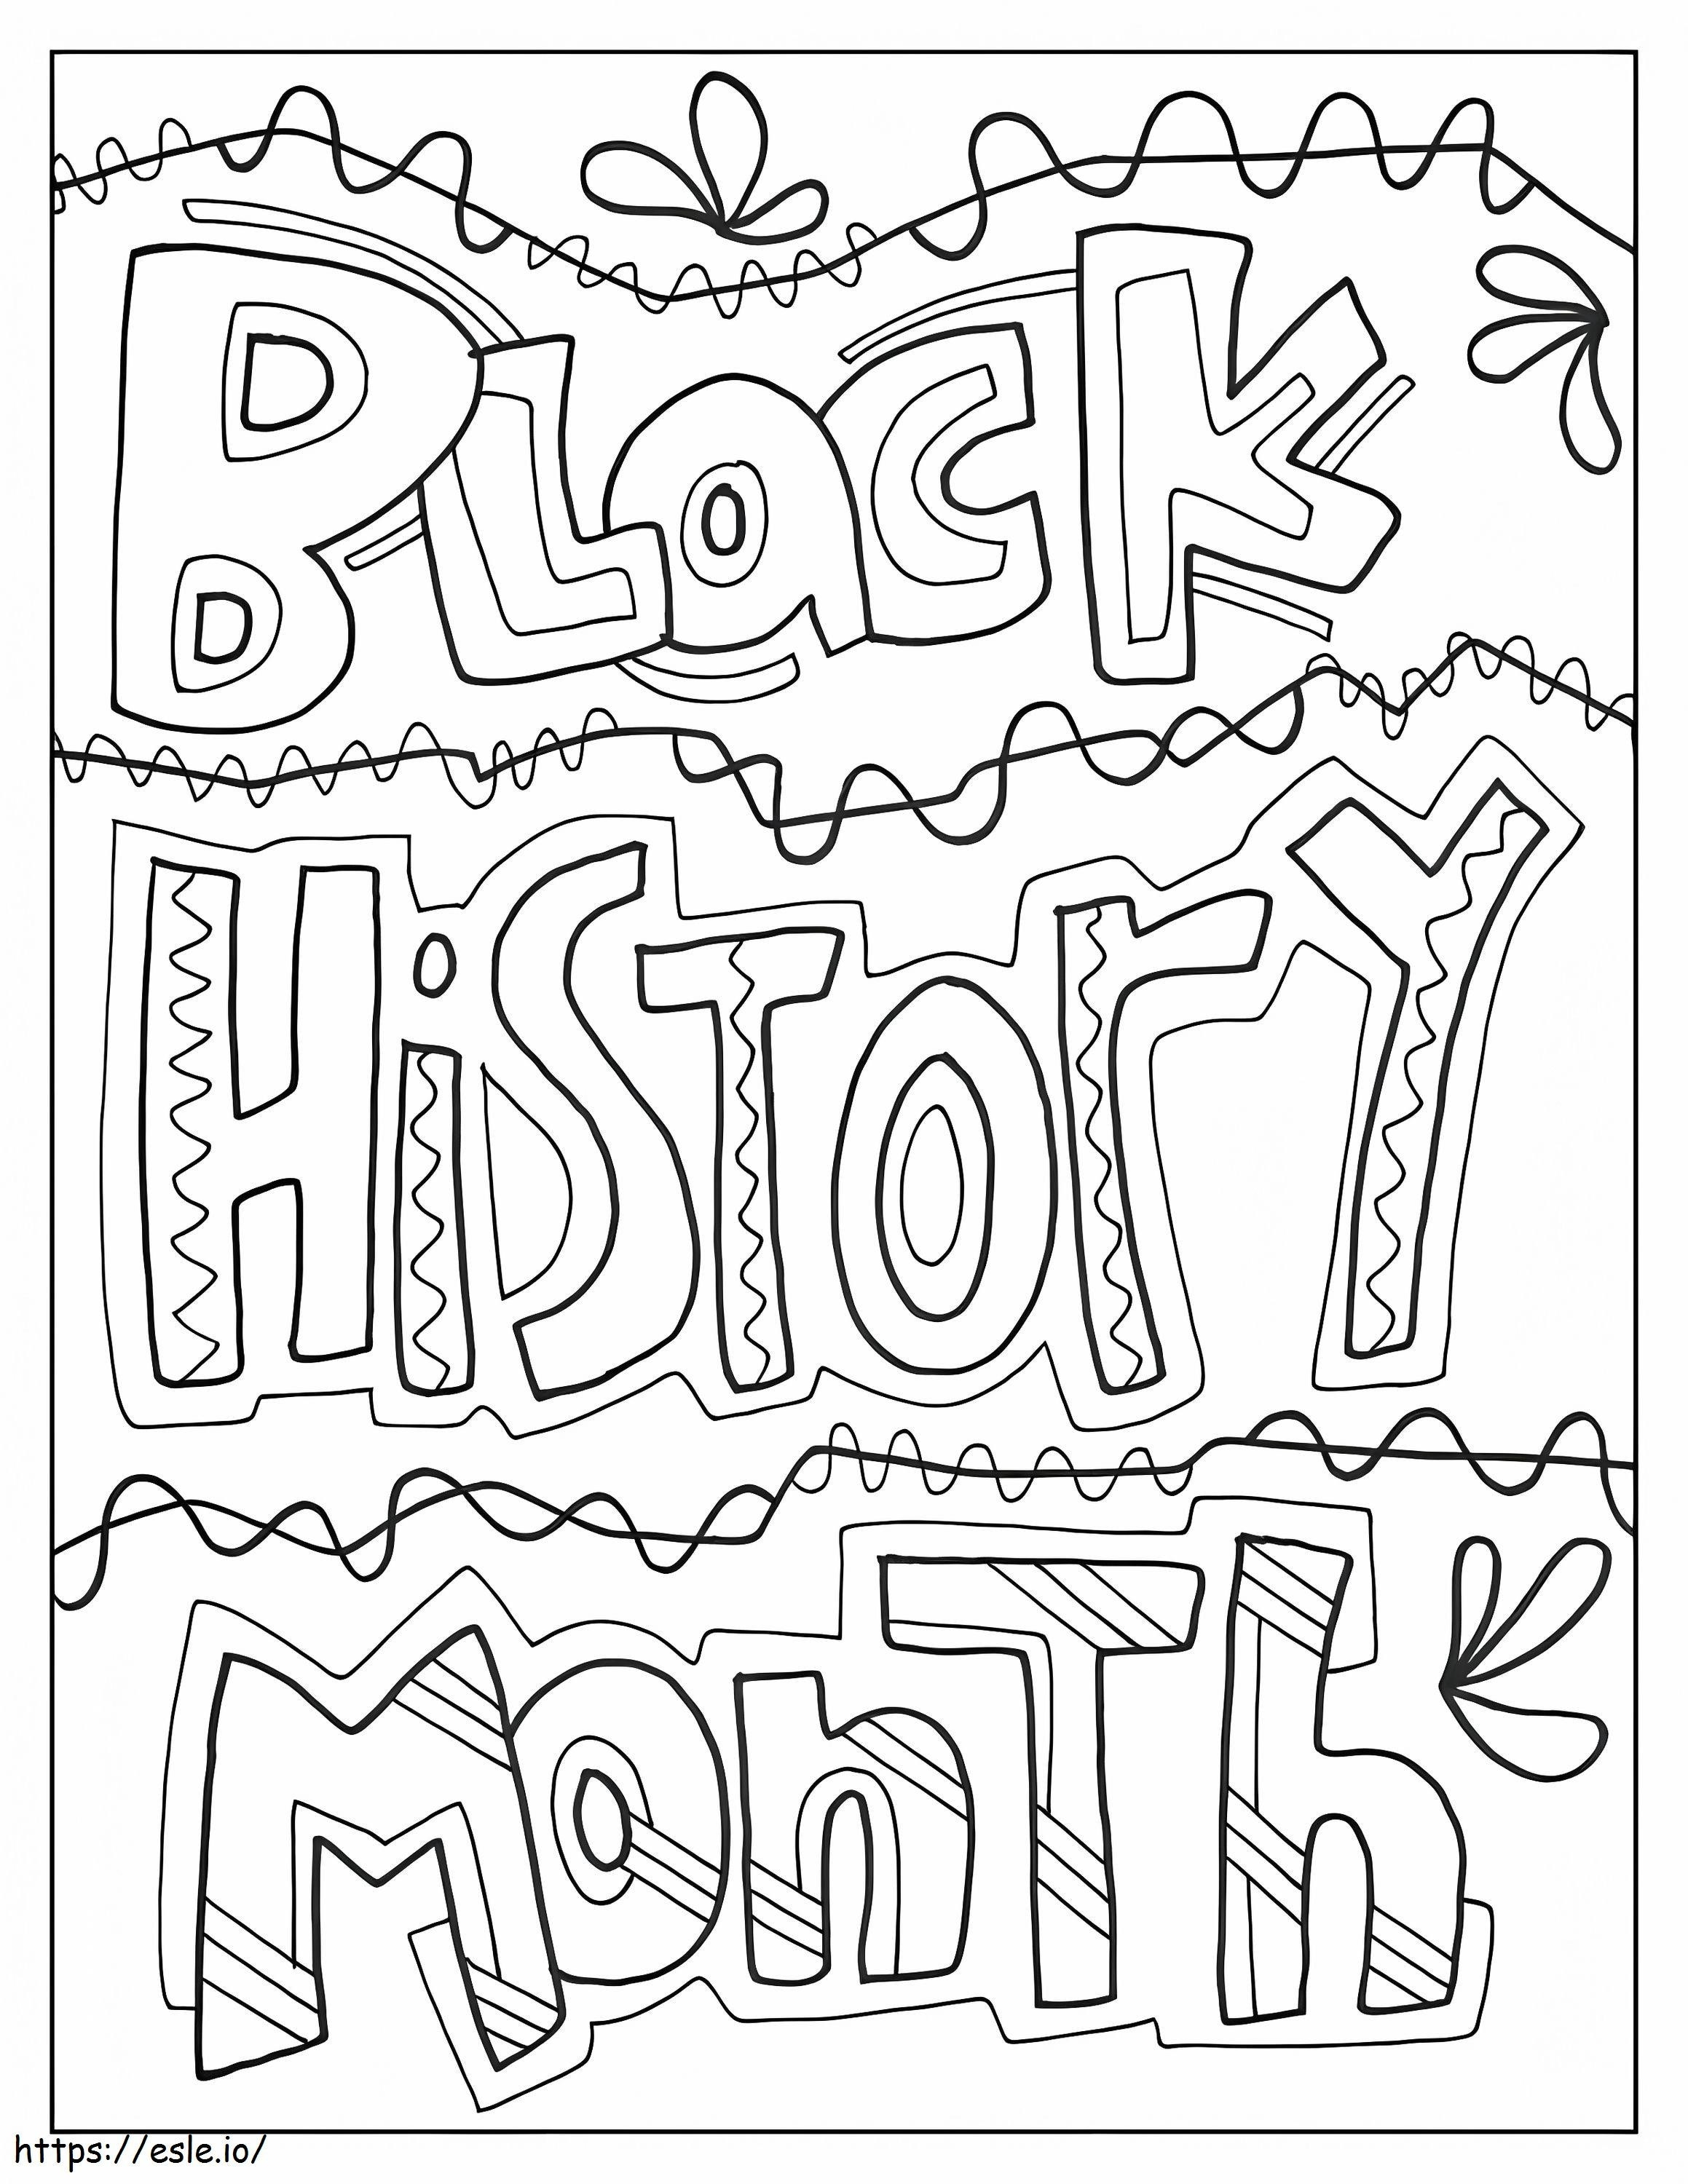 Black History Month coloring page